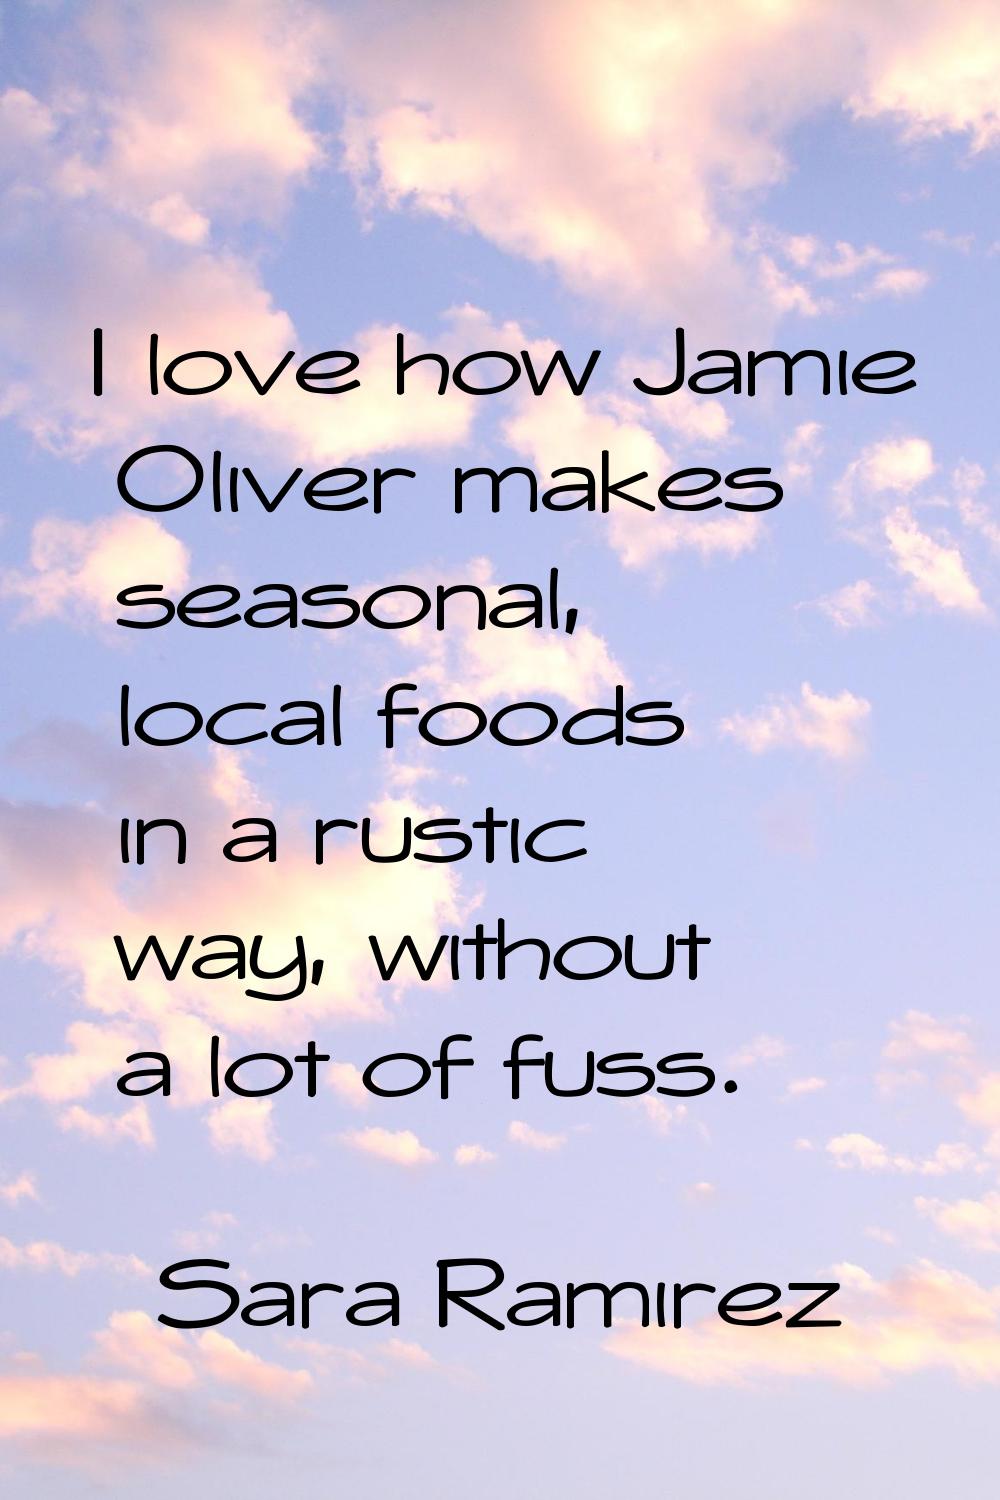 I love how Jamie Oliver makes seasonal, local foods in a rustic way, without a lot of fuss.